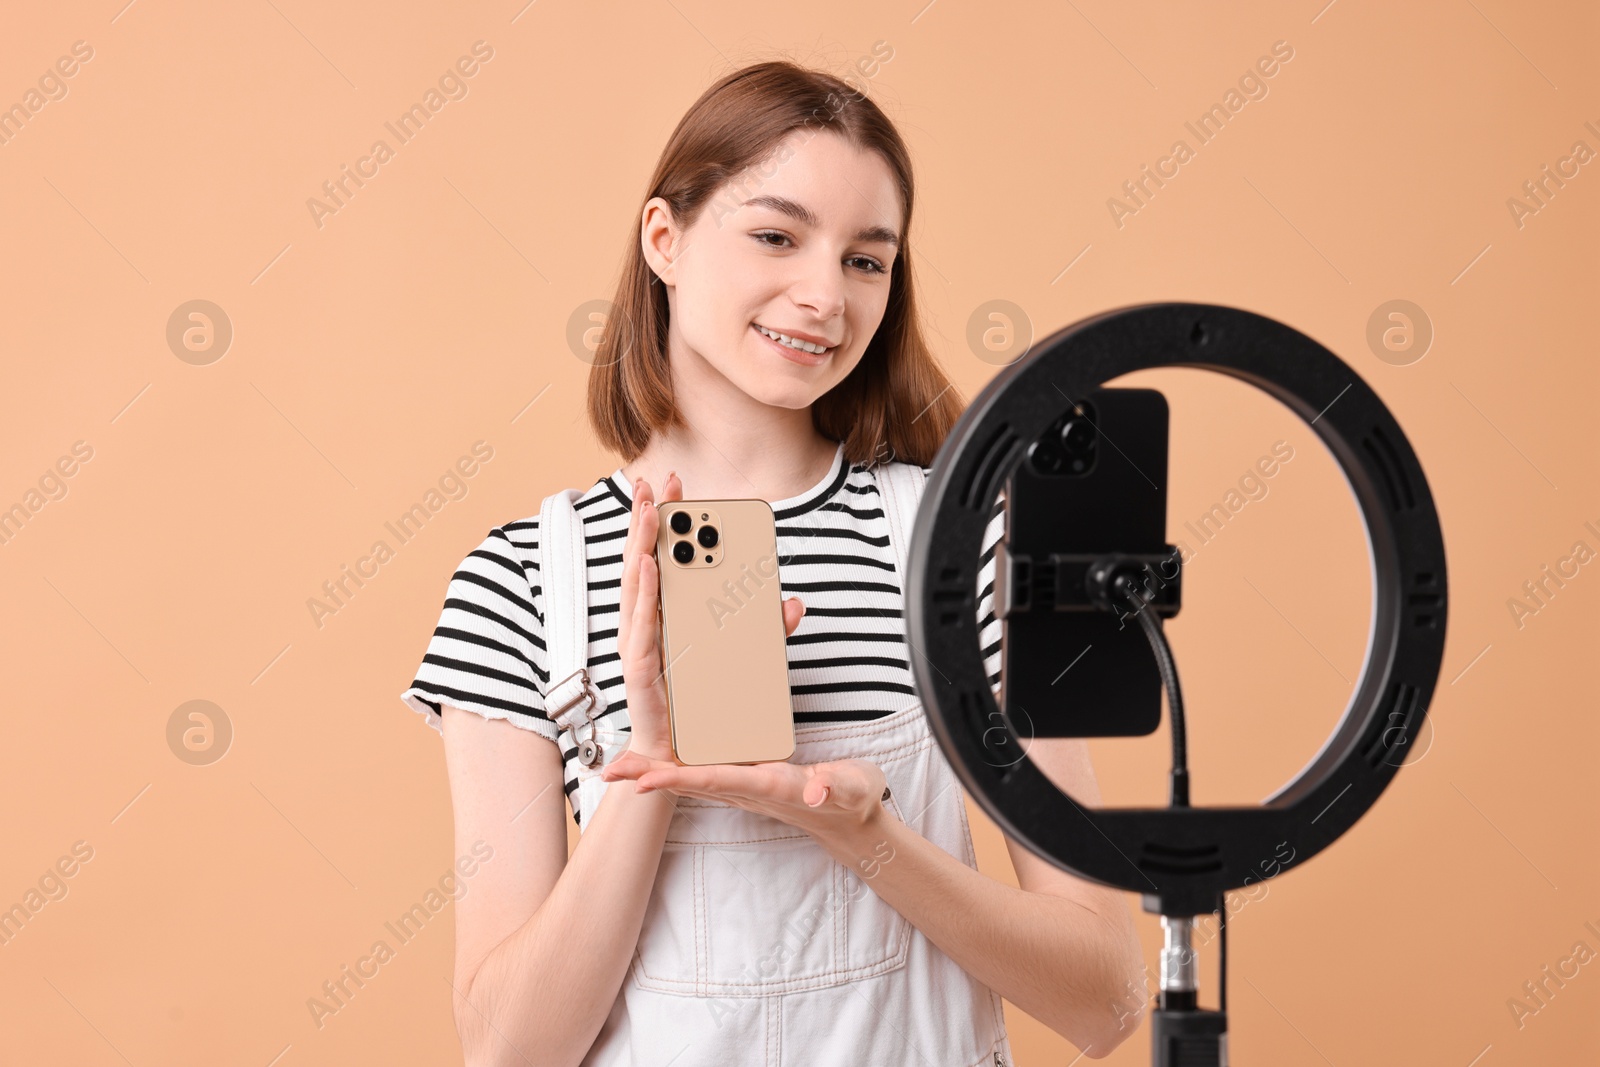 Photo of Technology blogger reviewing phone and recording video with smartphone and ring lamp on beige background